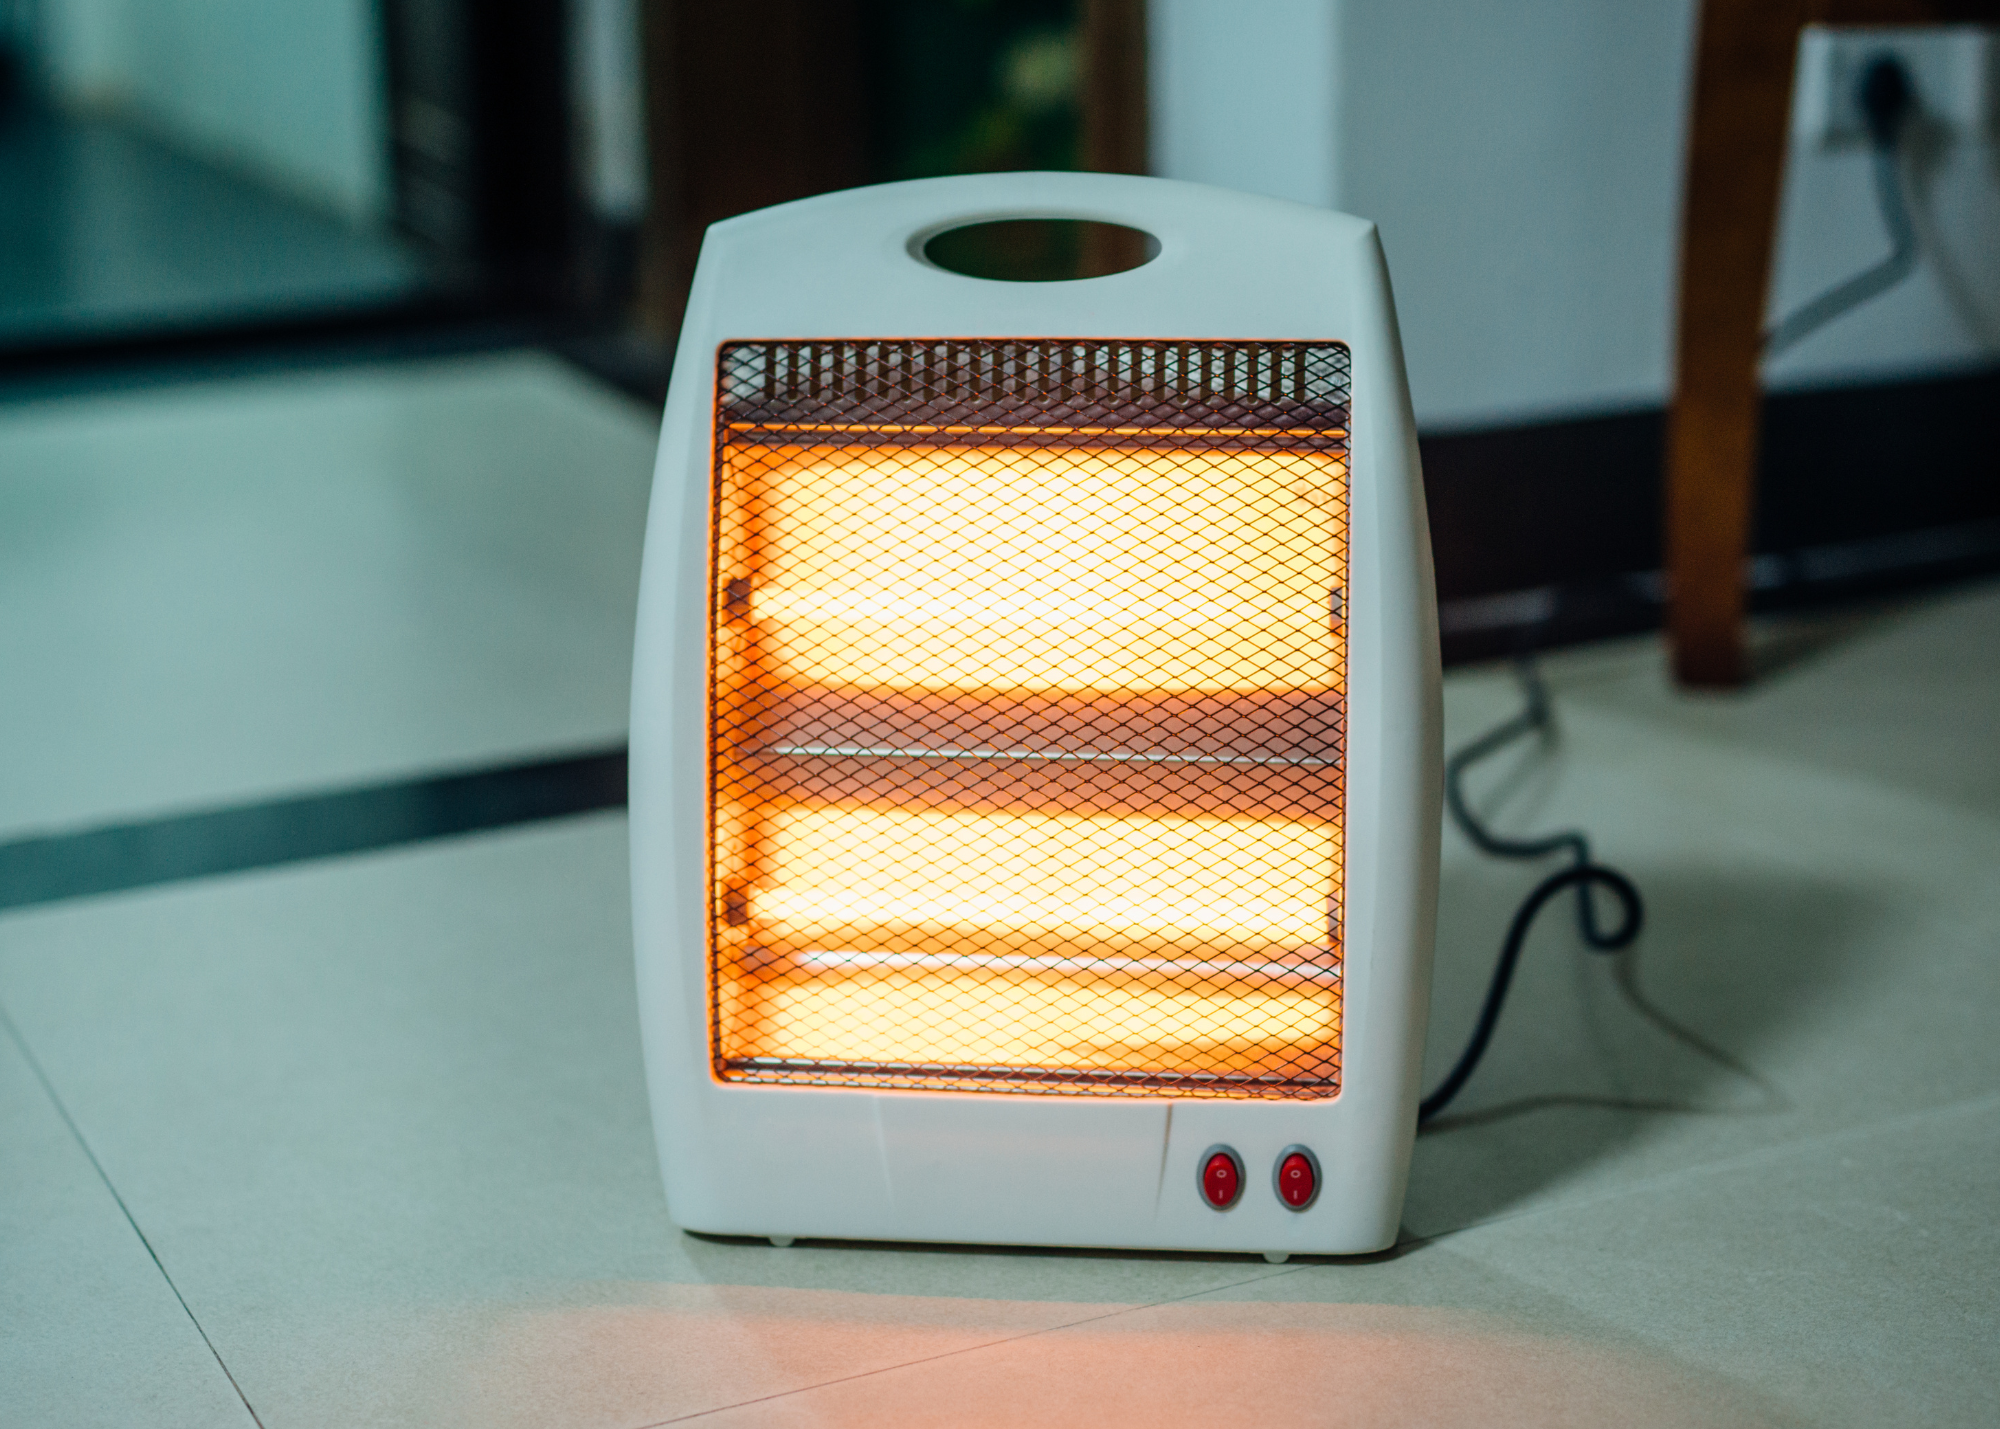 Tamarac Fire Department: Stay Warm, But Be Careful Using Space Heaters